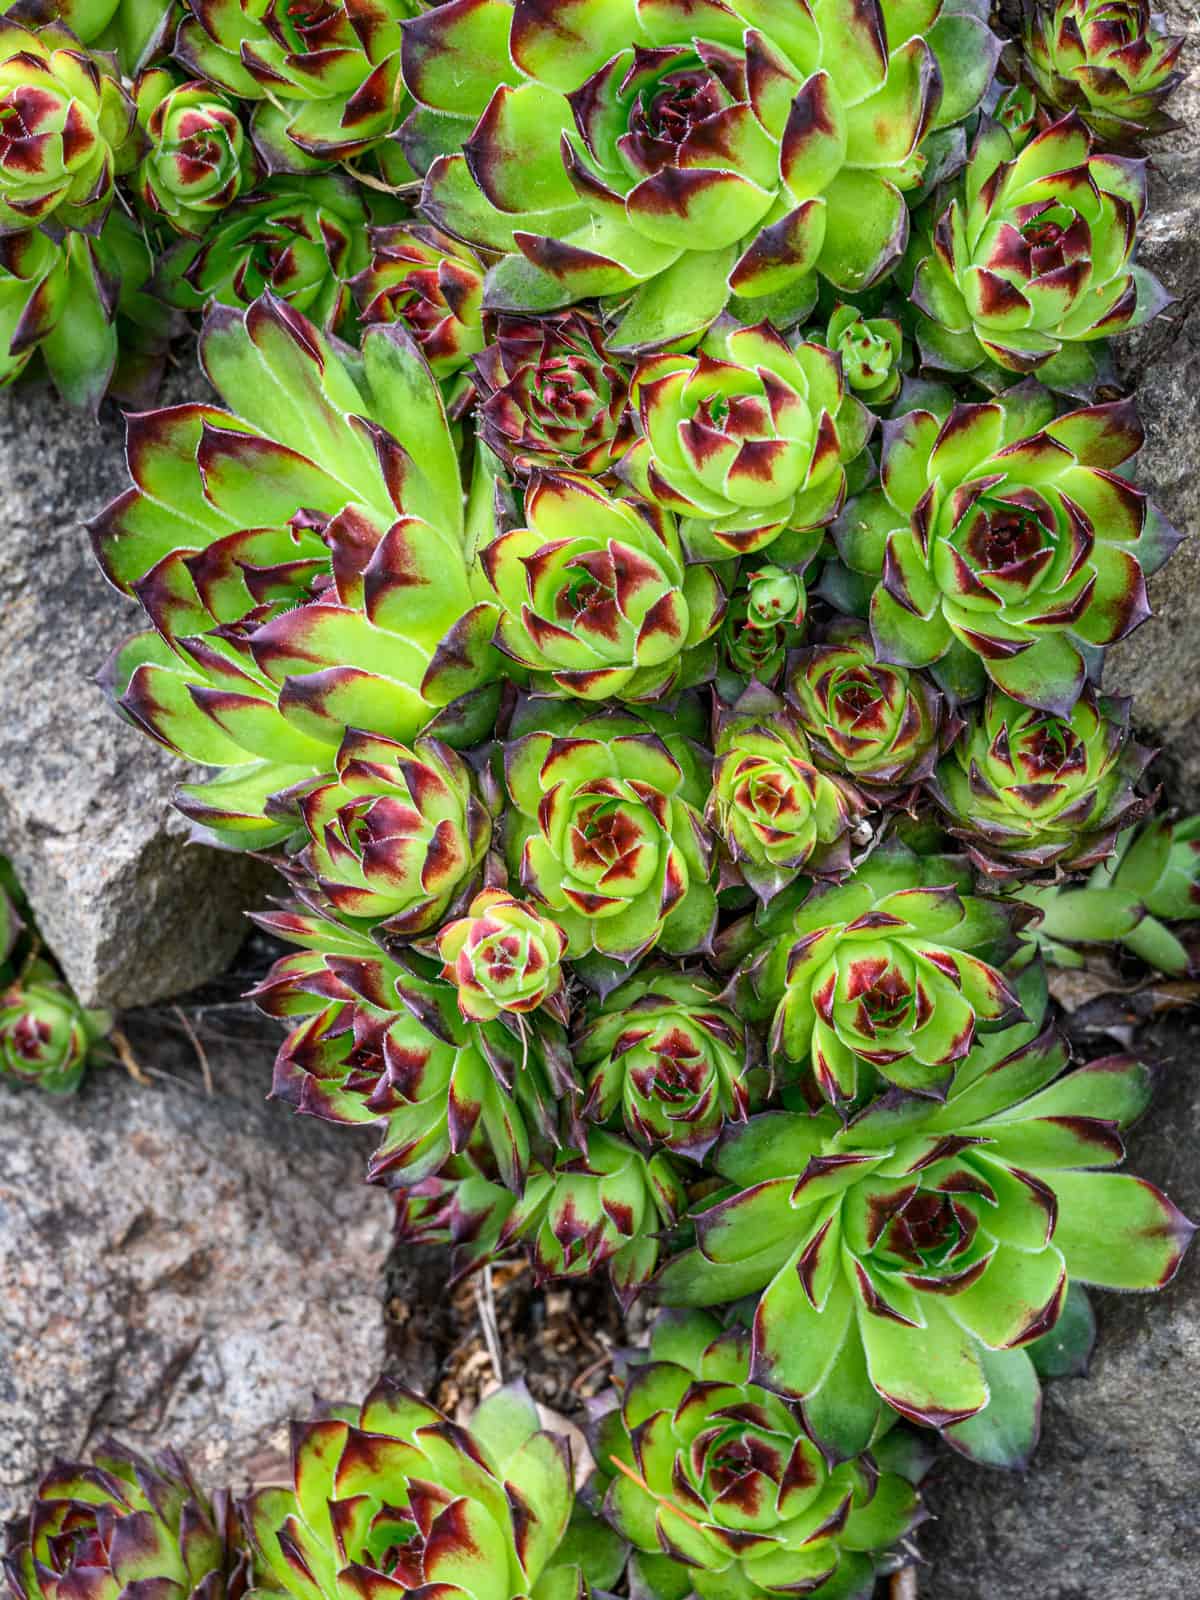 Hens and Chicks succulent photographed up close